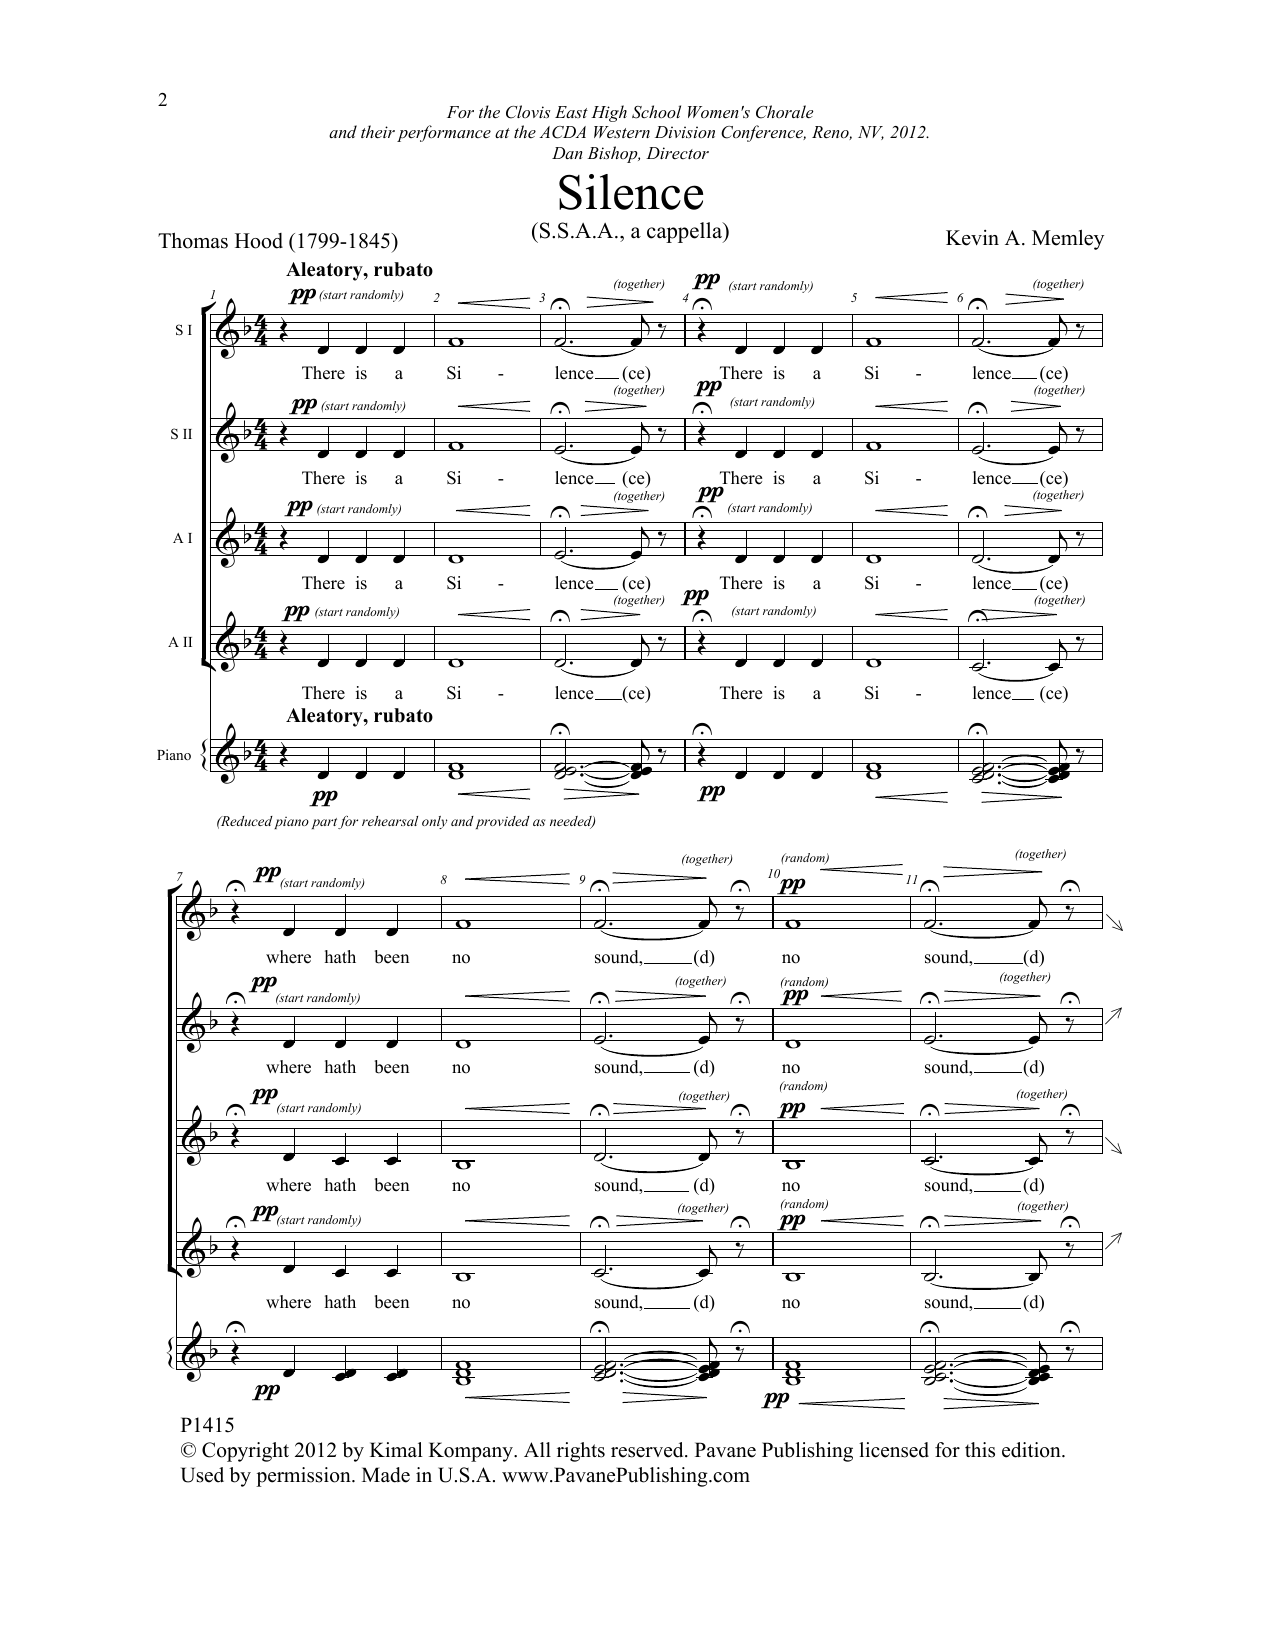 Download Kevin A. Memley Silence Sheet Music